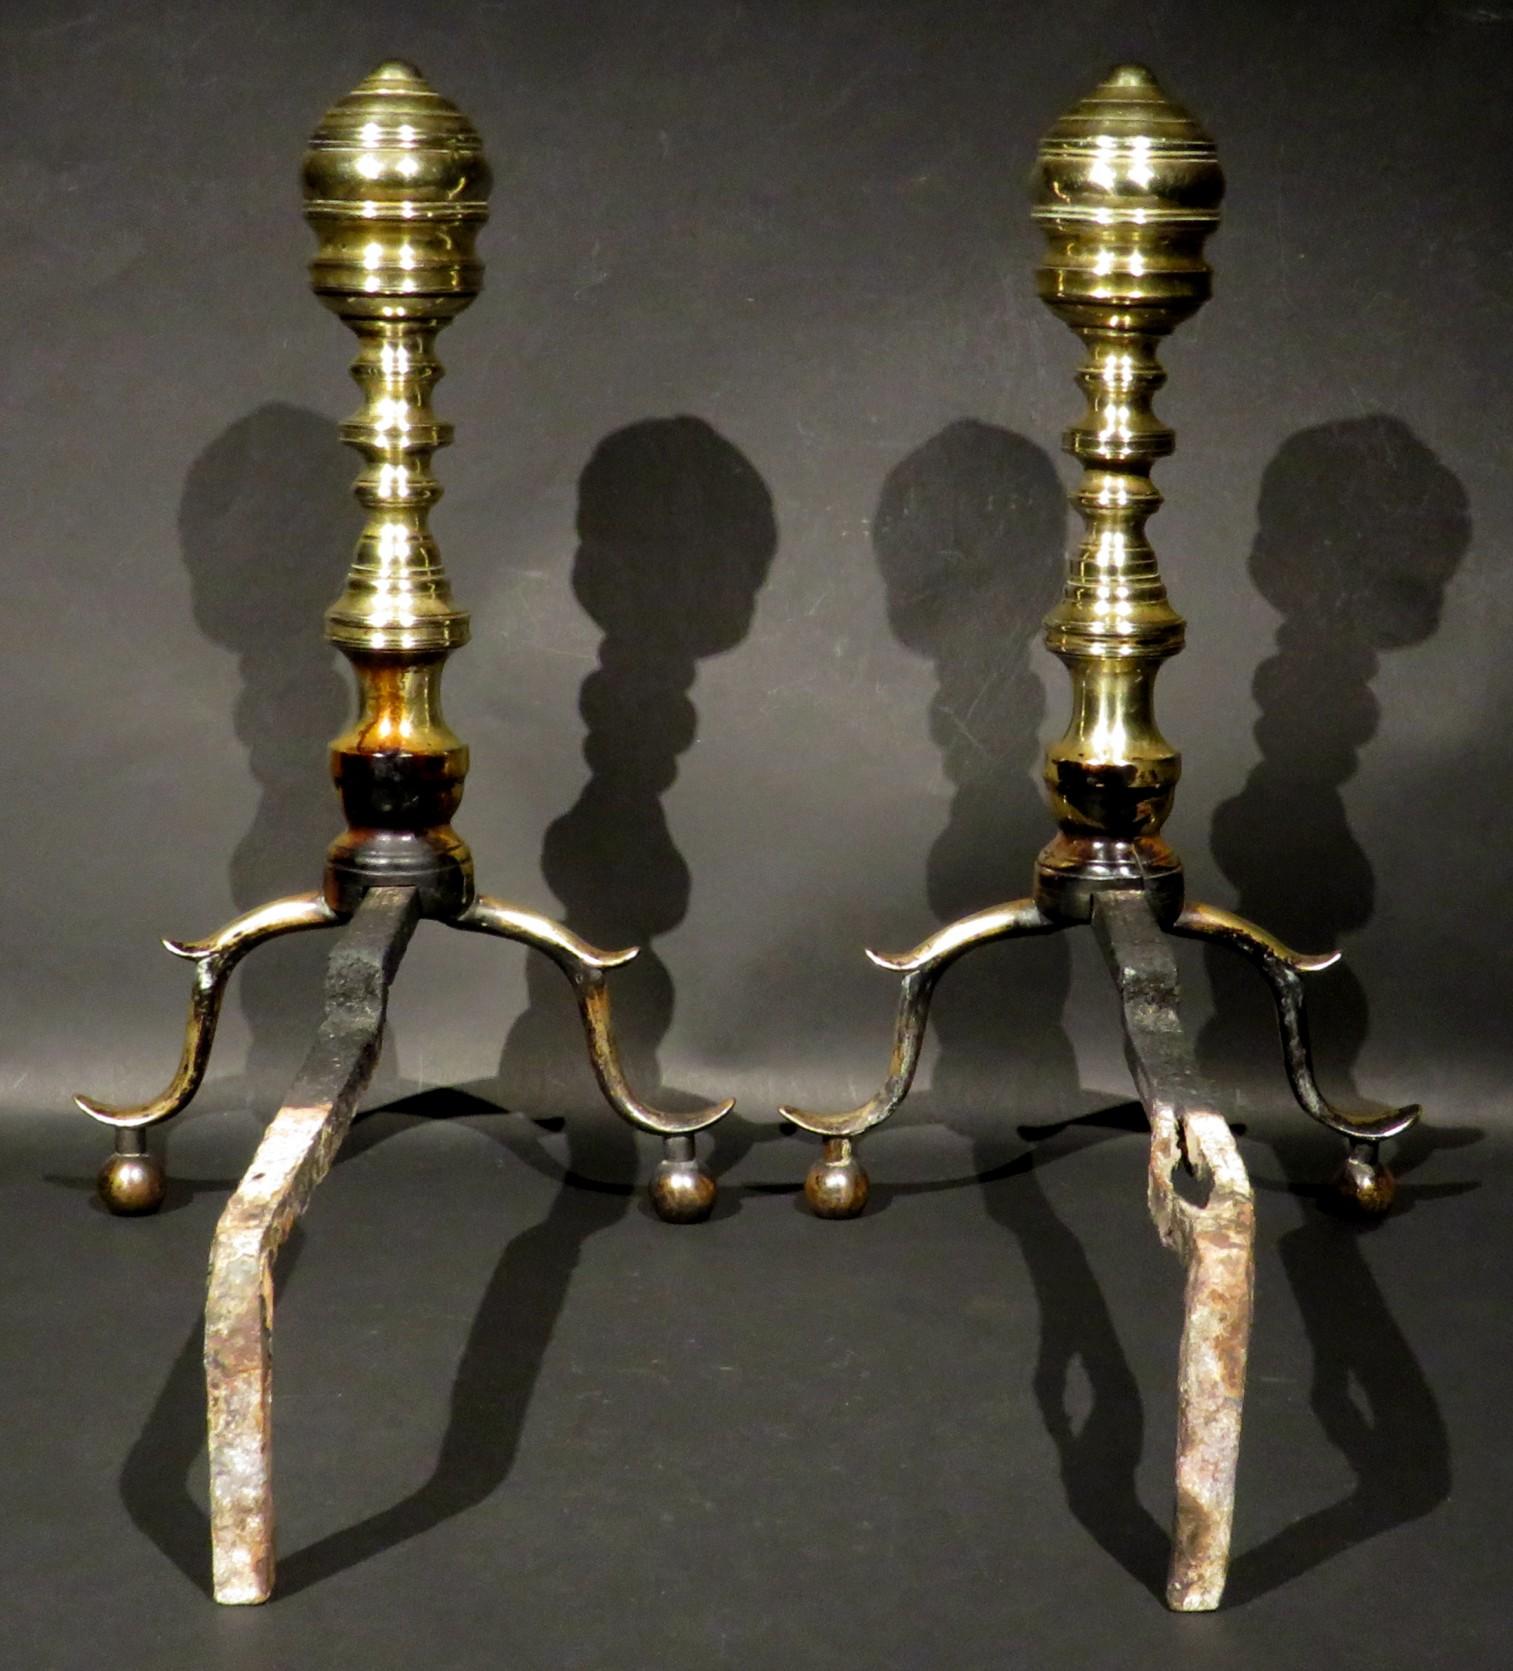 Forged Pair of Early 19th Century Beehive Brass Andirons, New England Circa 1800